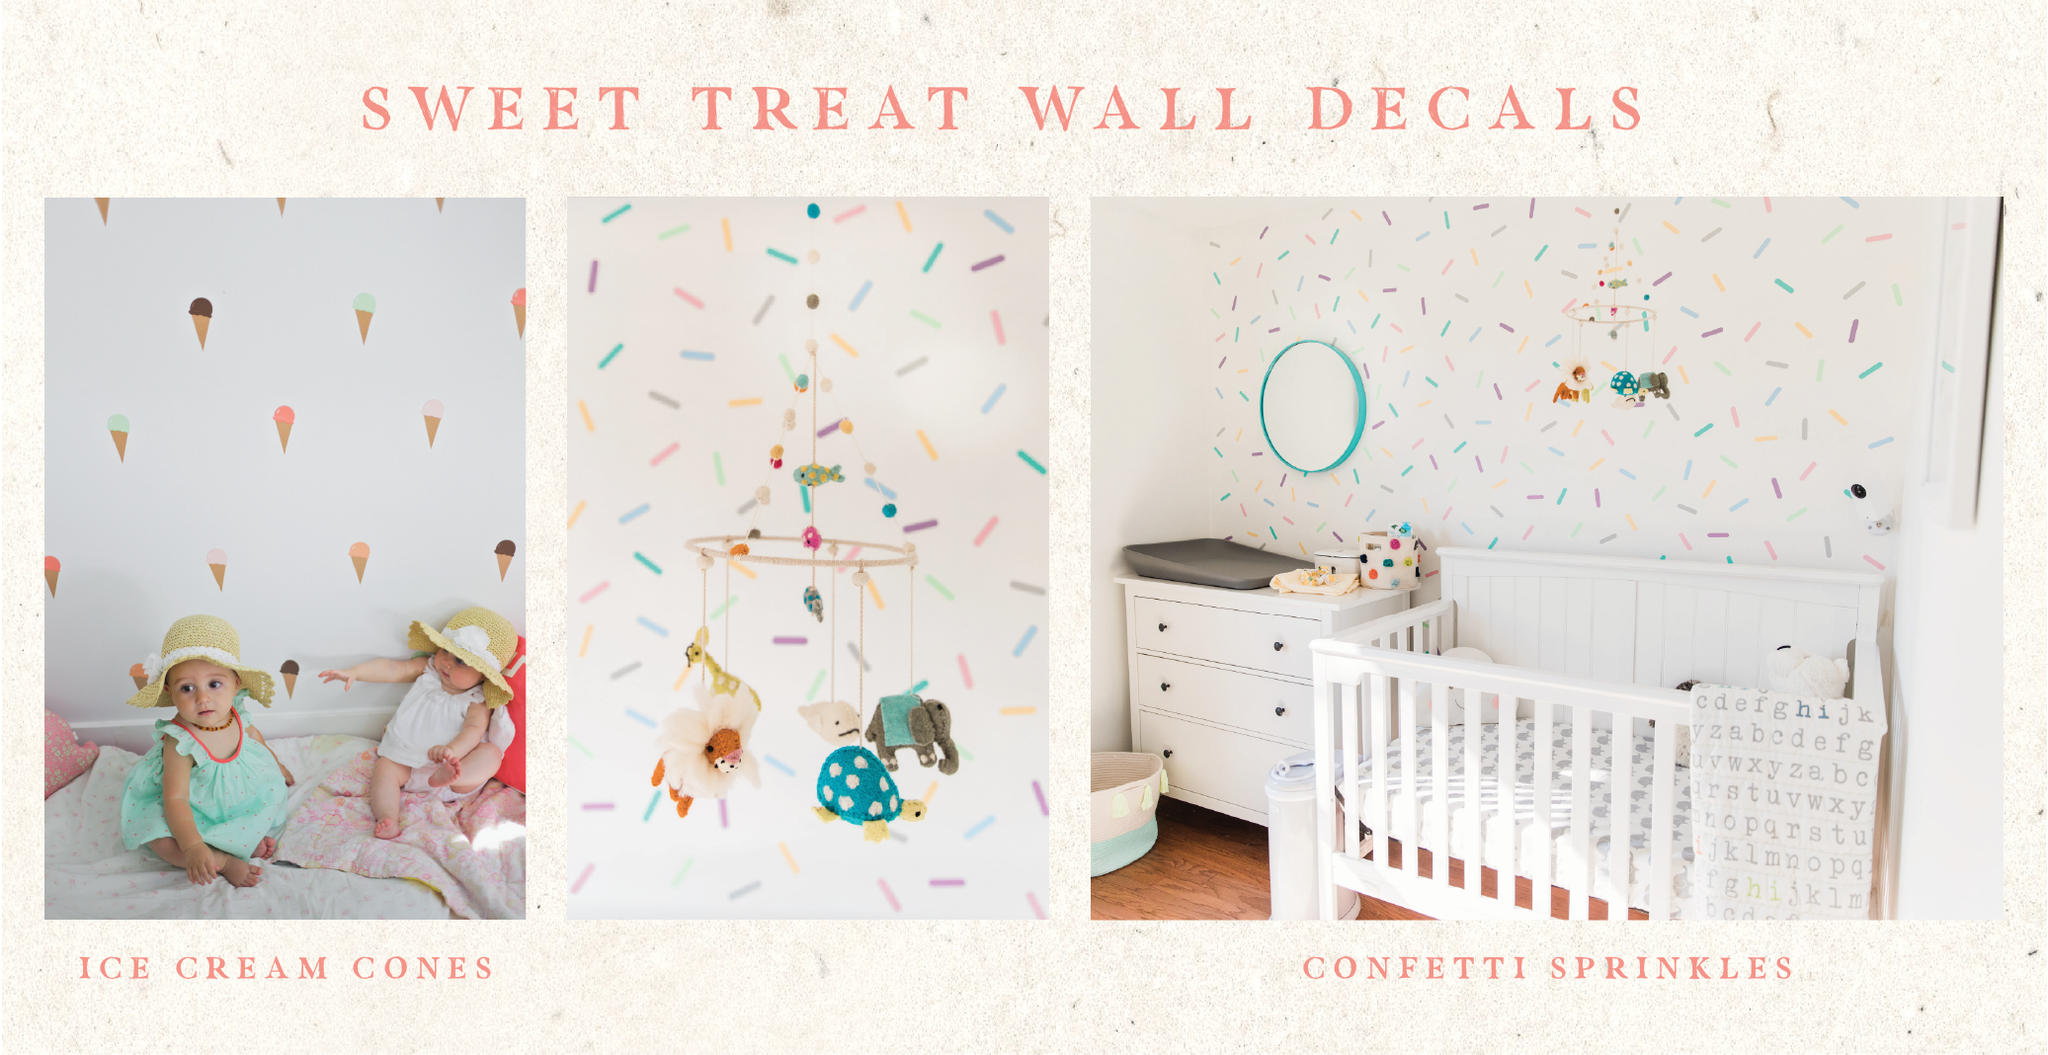 Sweet treat wall decals